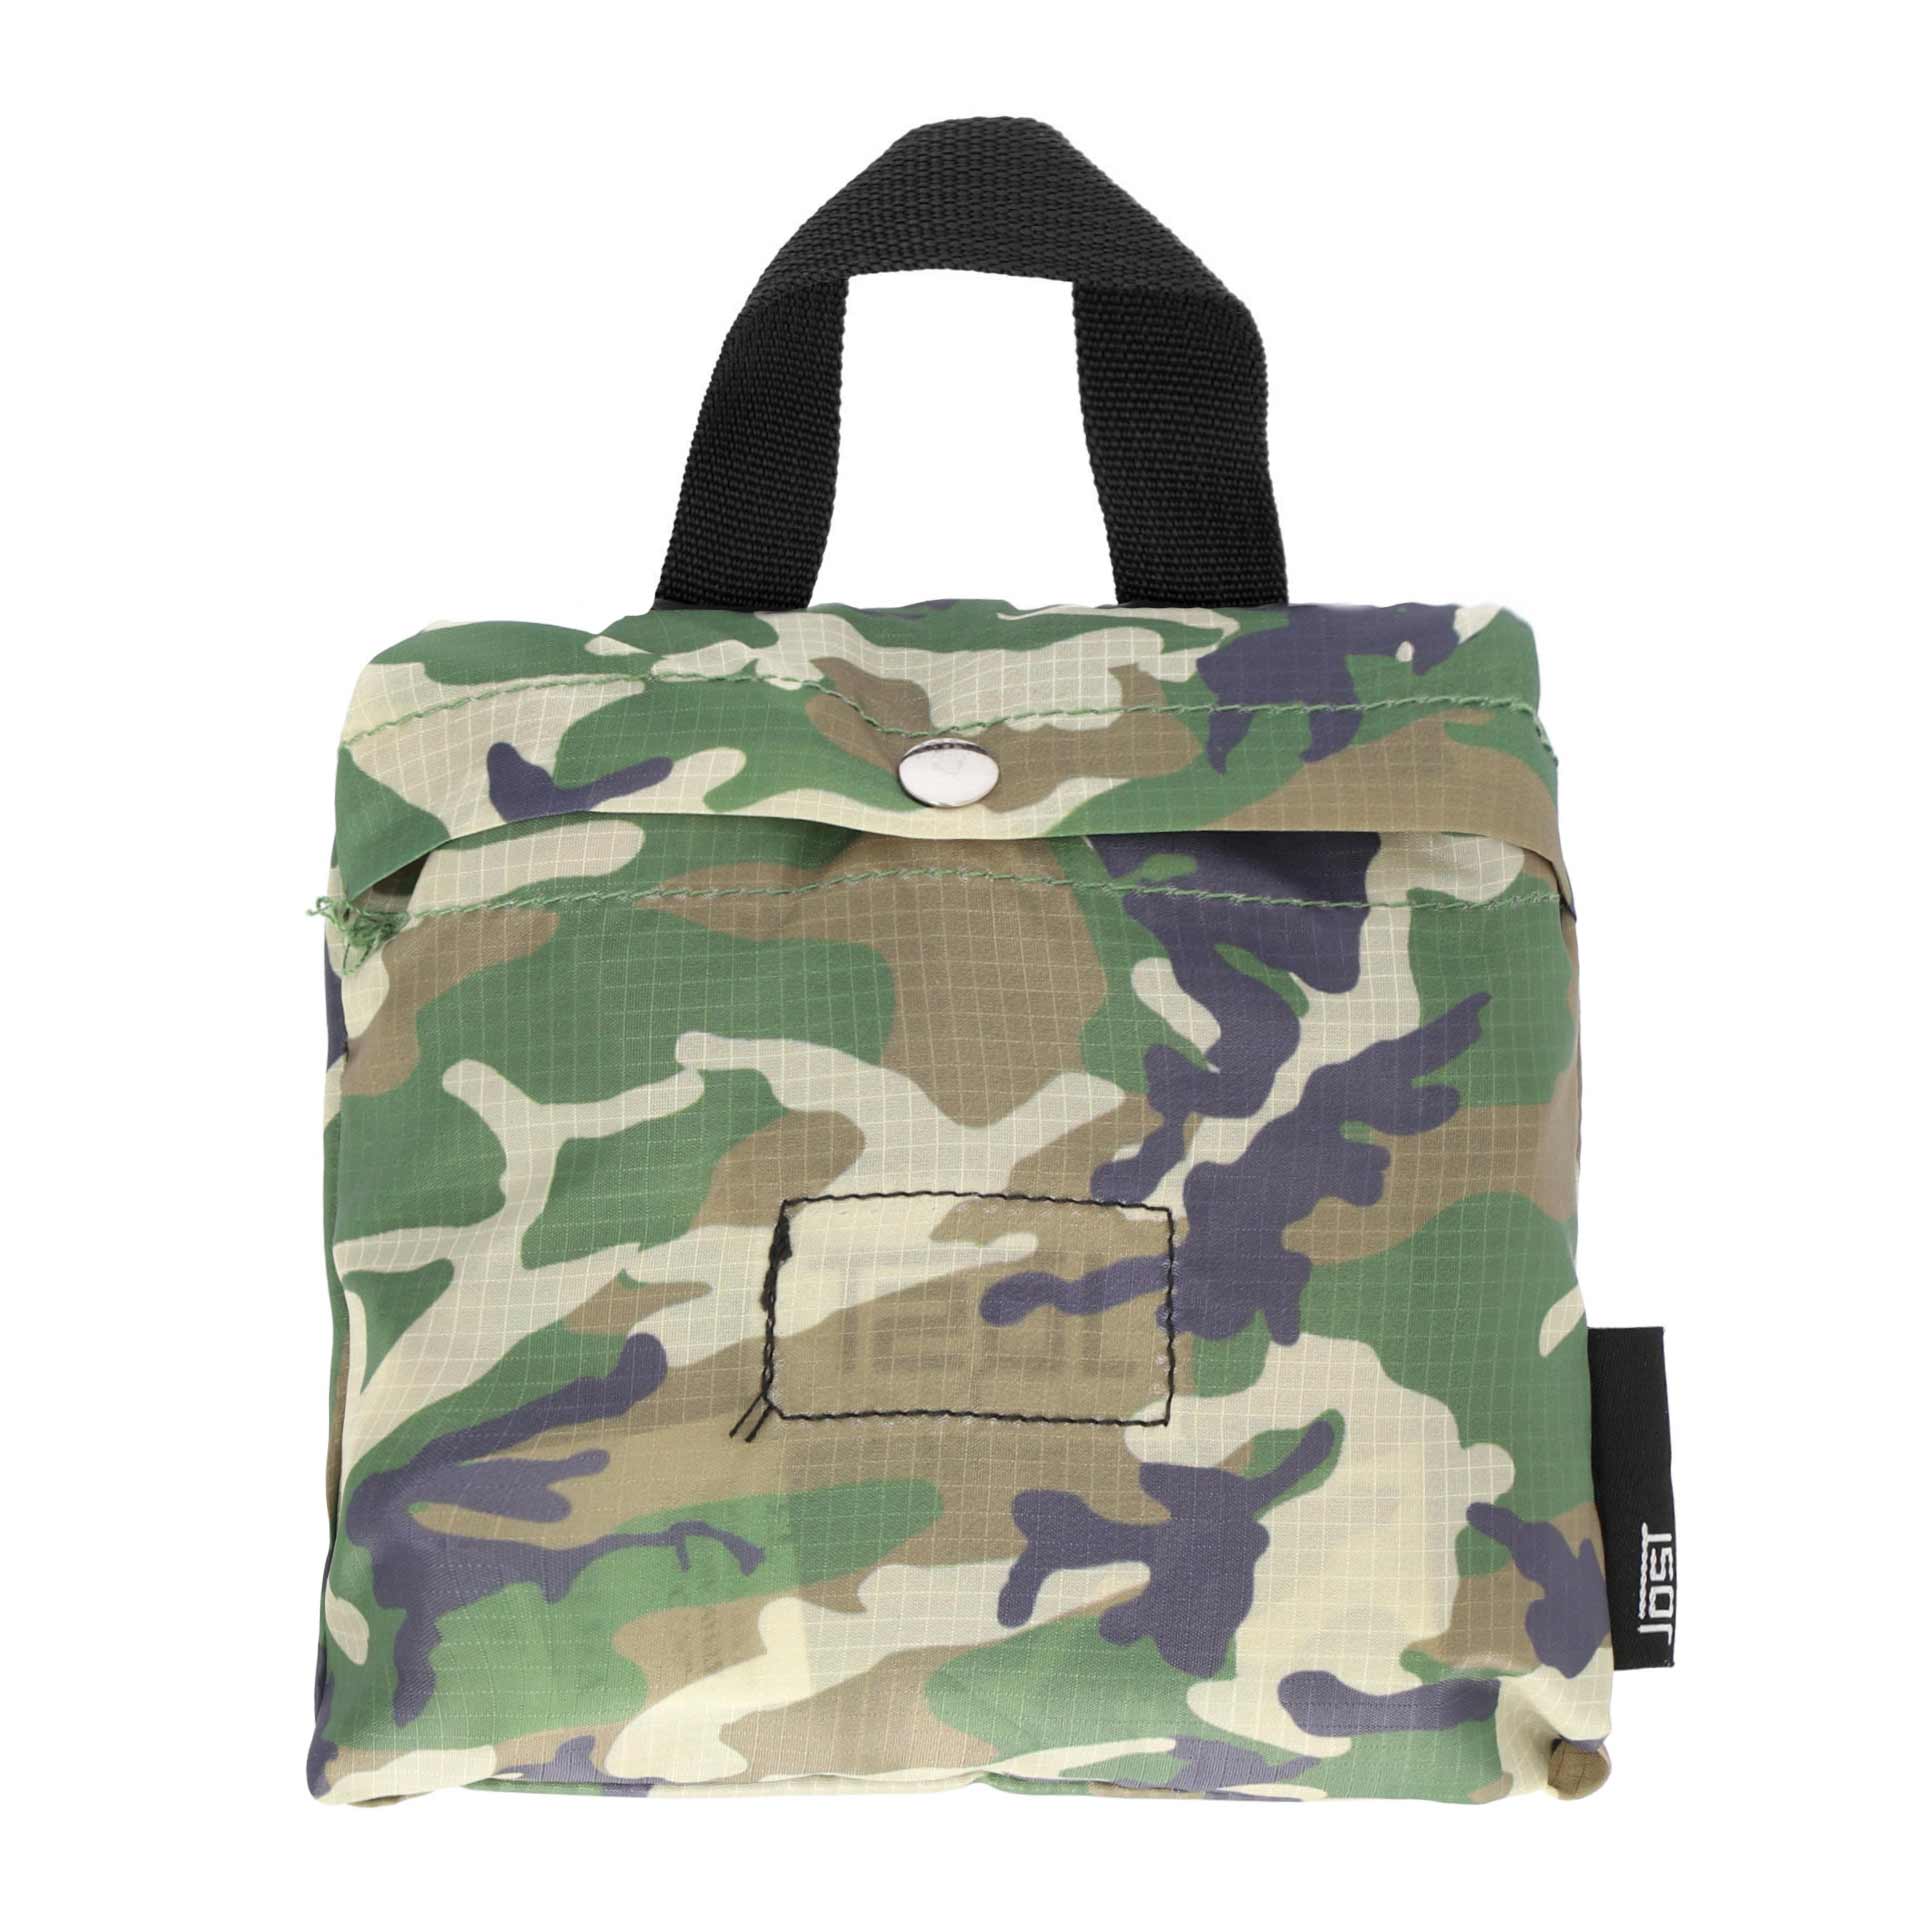 Jost Visby X-Change Bag S camouflage